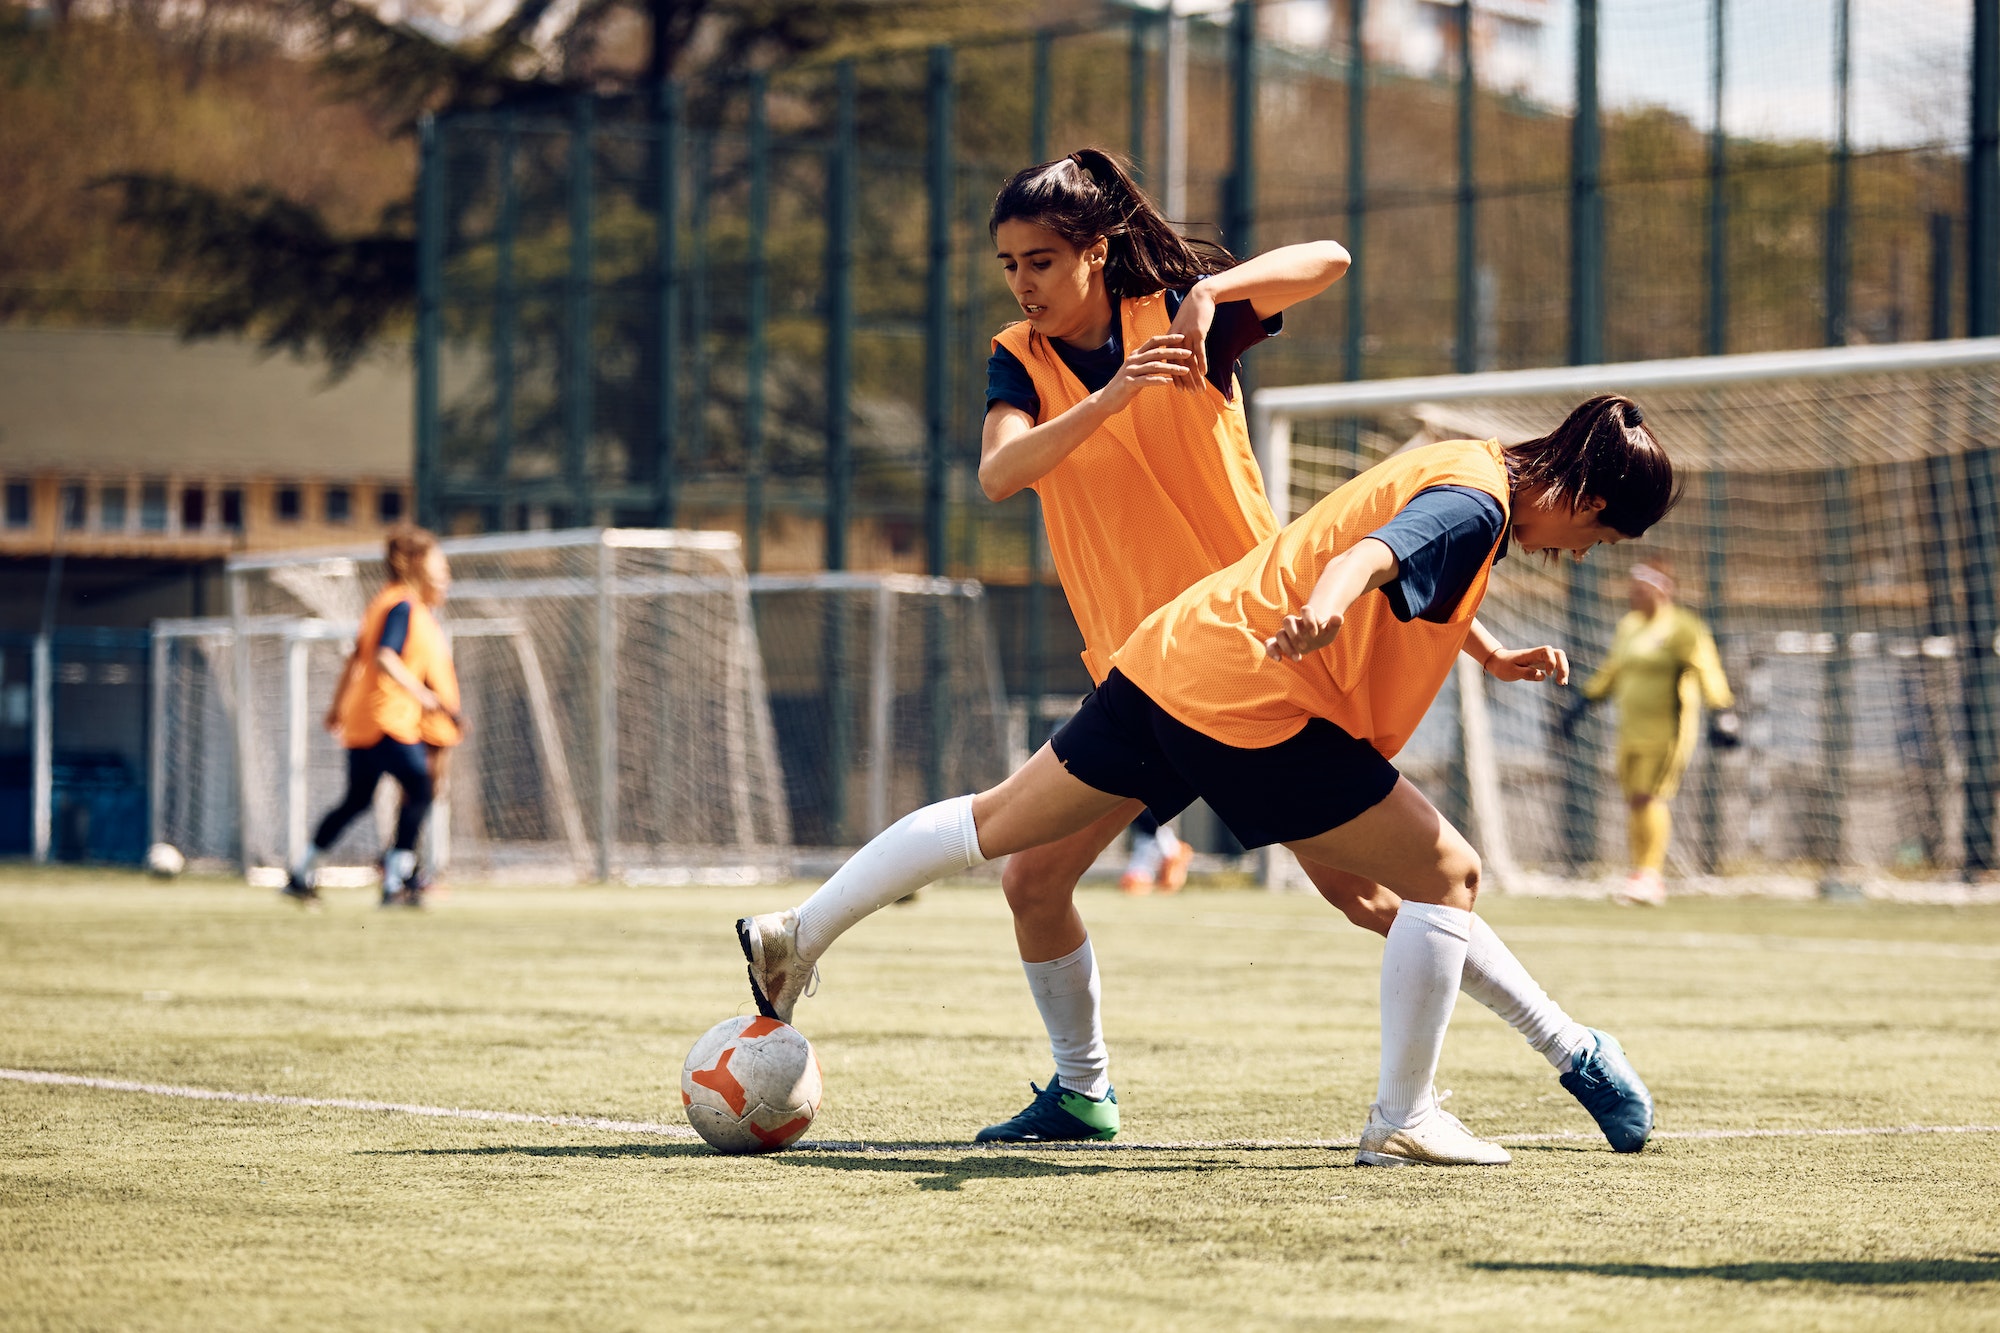 Female players in action on soccer pitch.